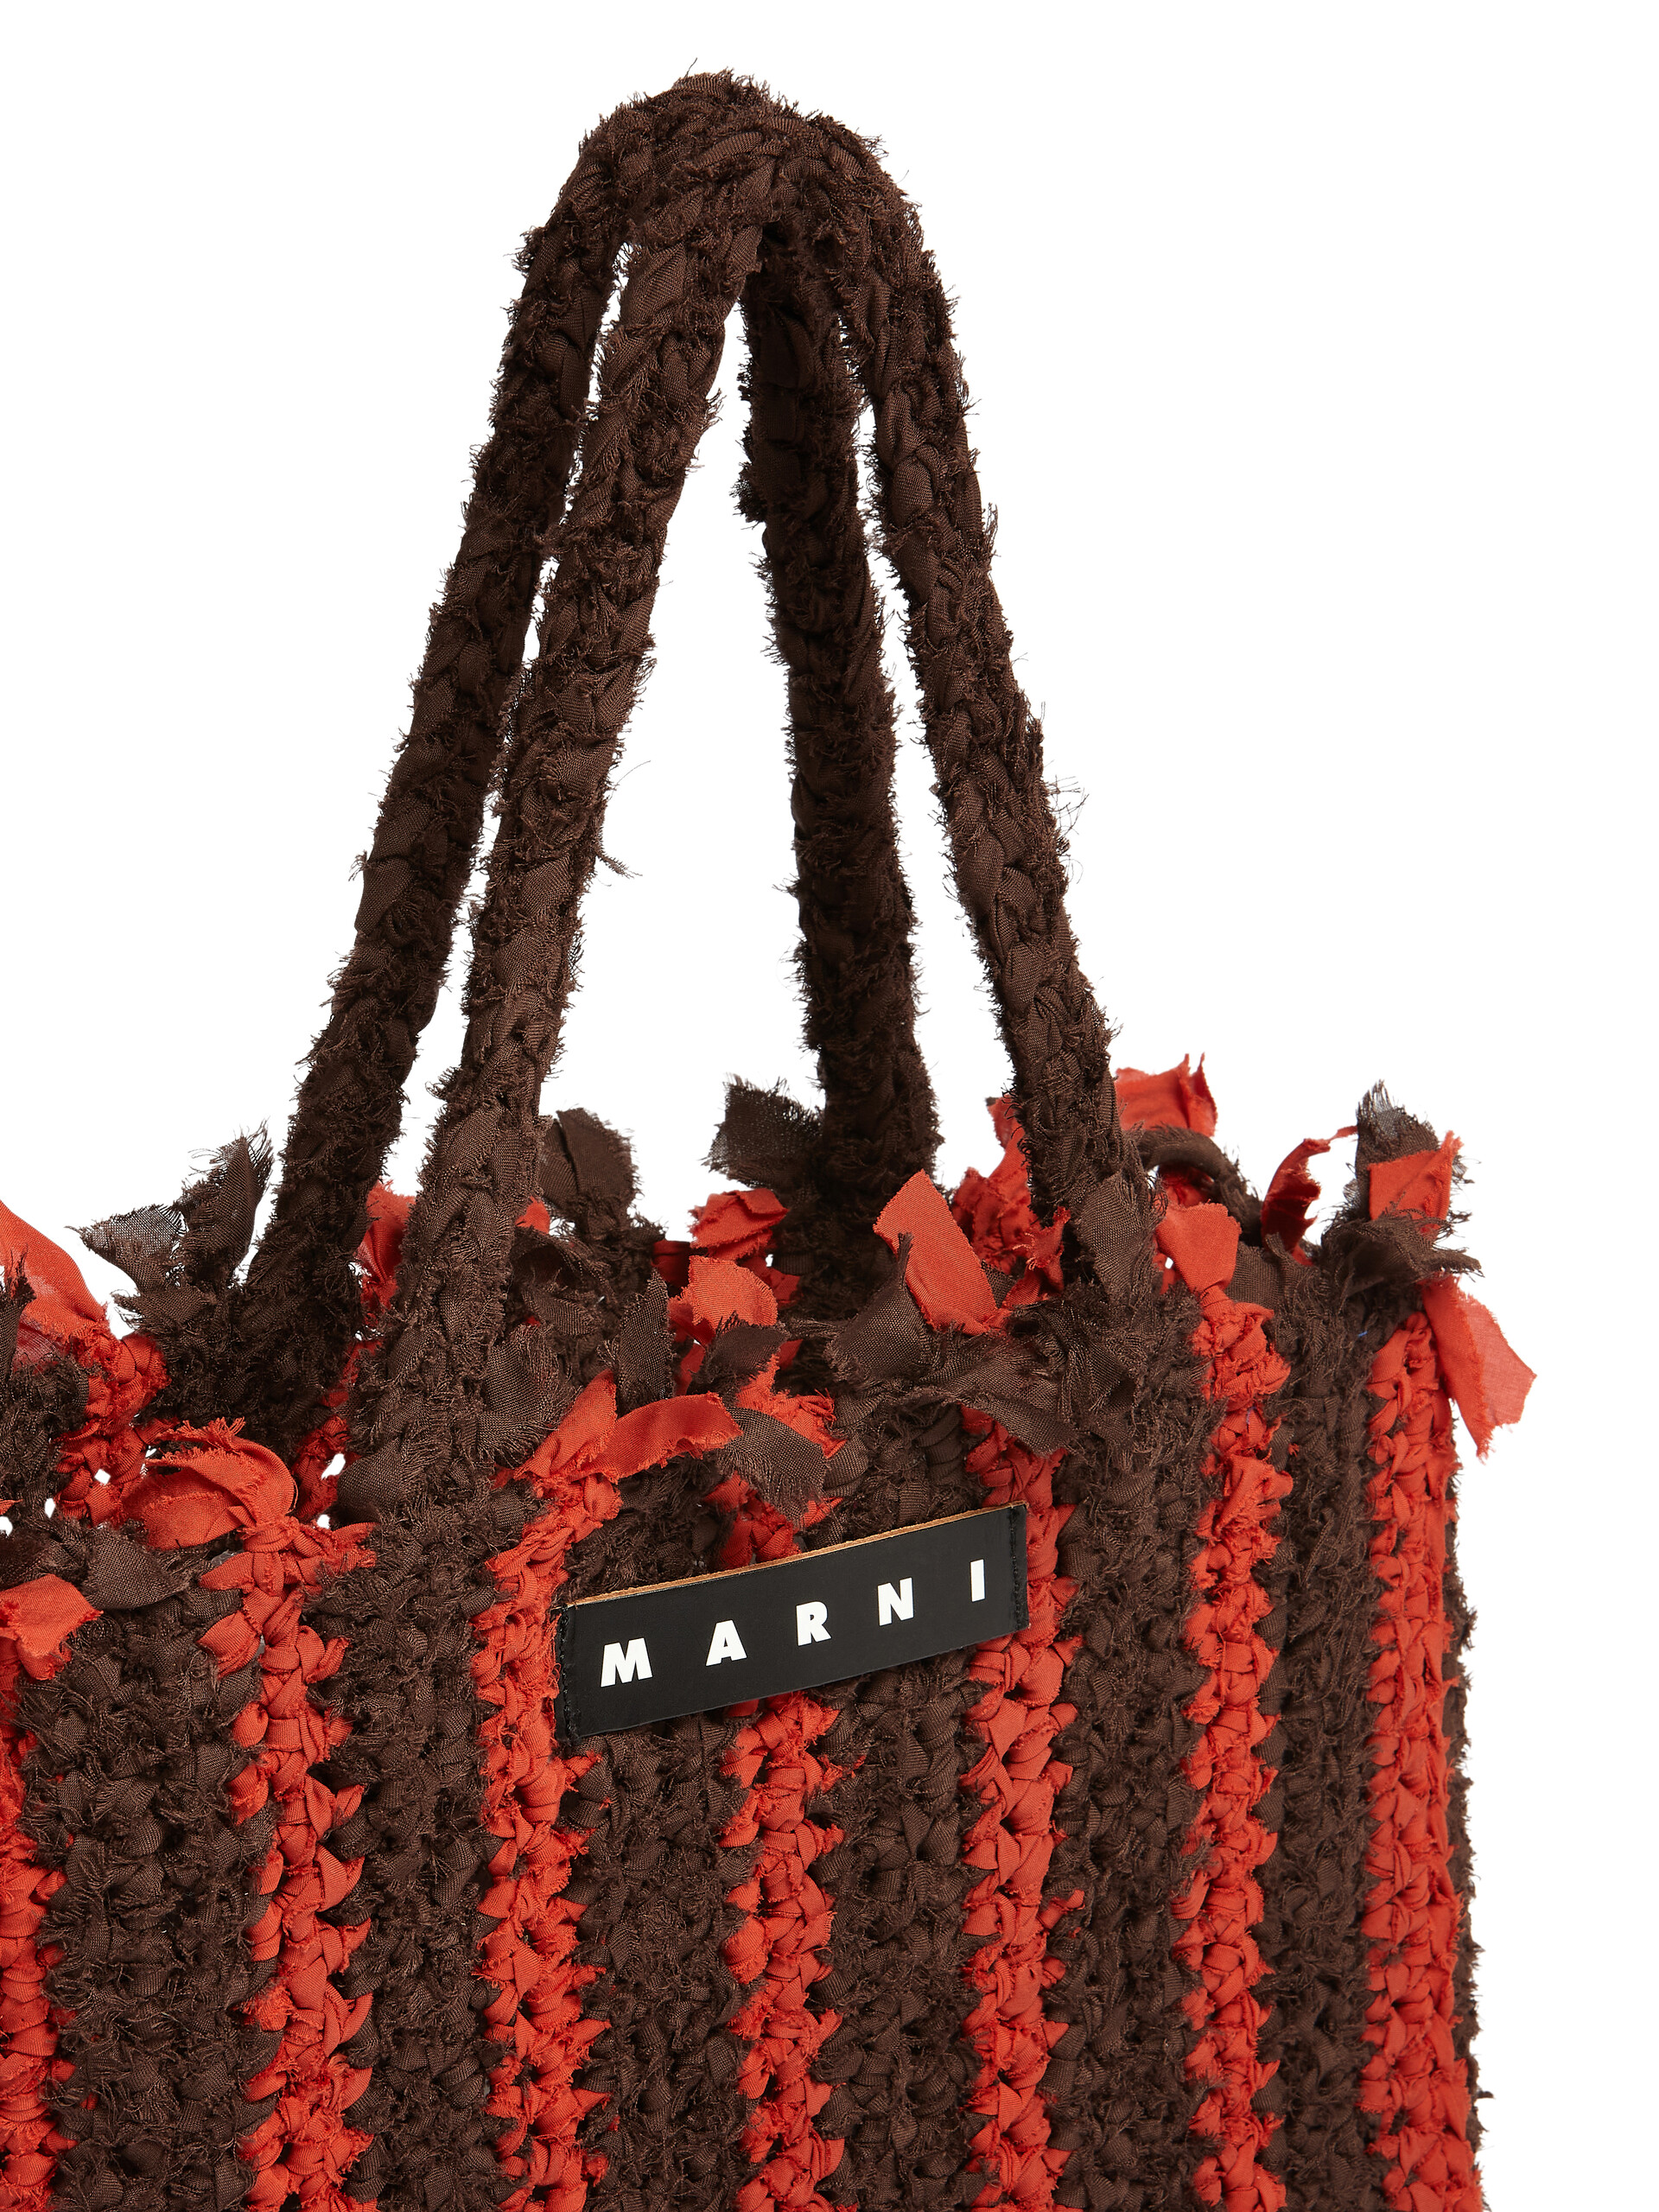 MARNI MARKET bag in brown and red cotton - Bags - Image 4